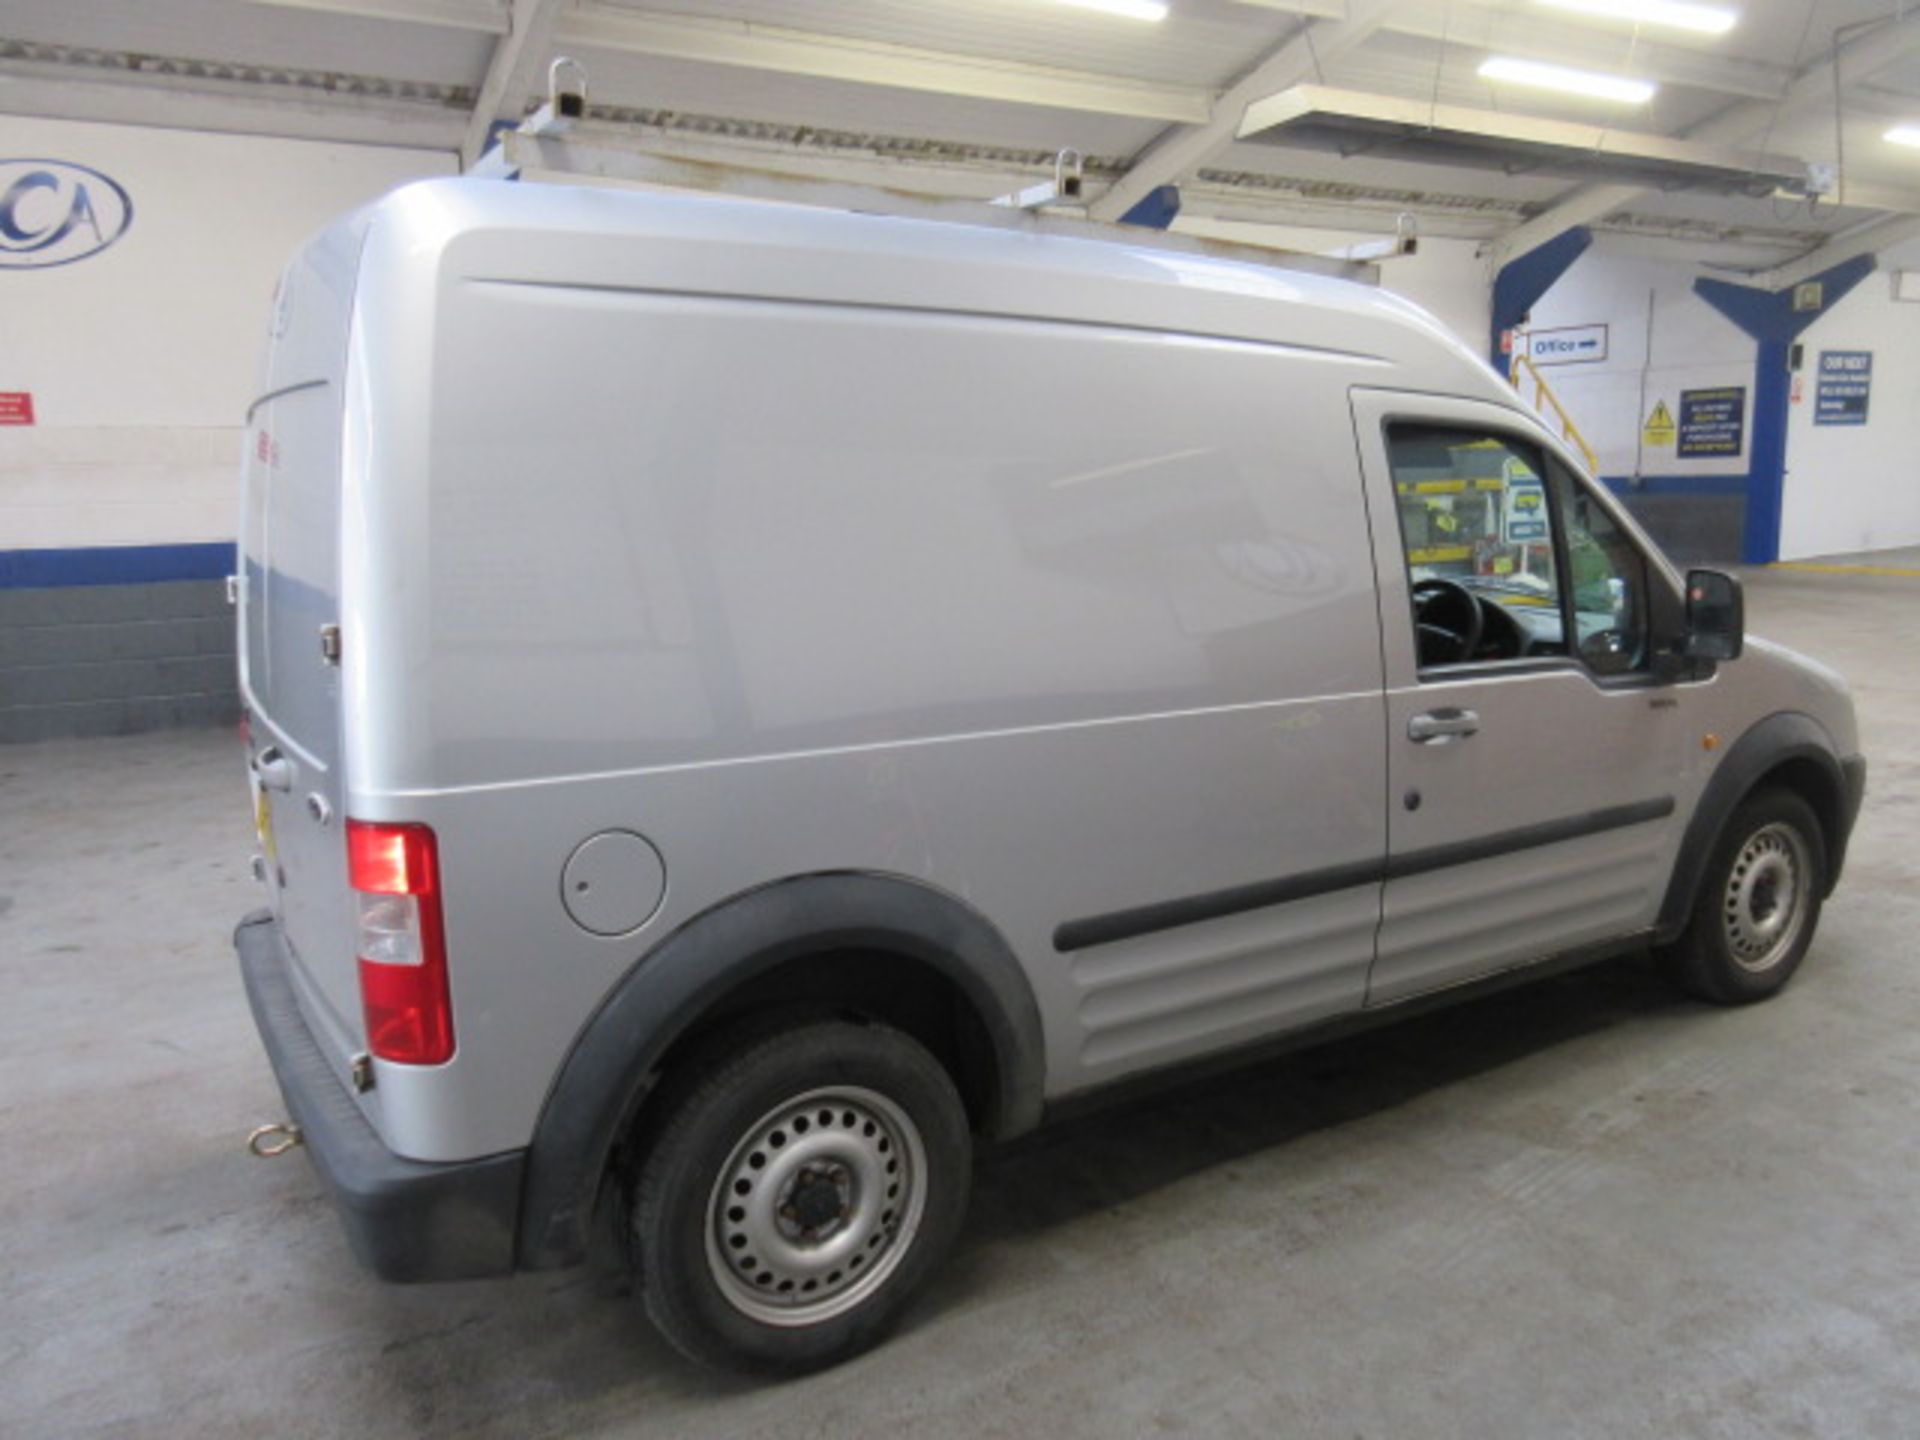 06 06 Ford Transit Connect L230 - Image 12 of 20